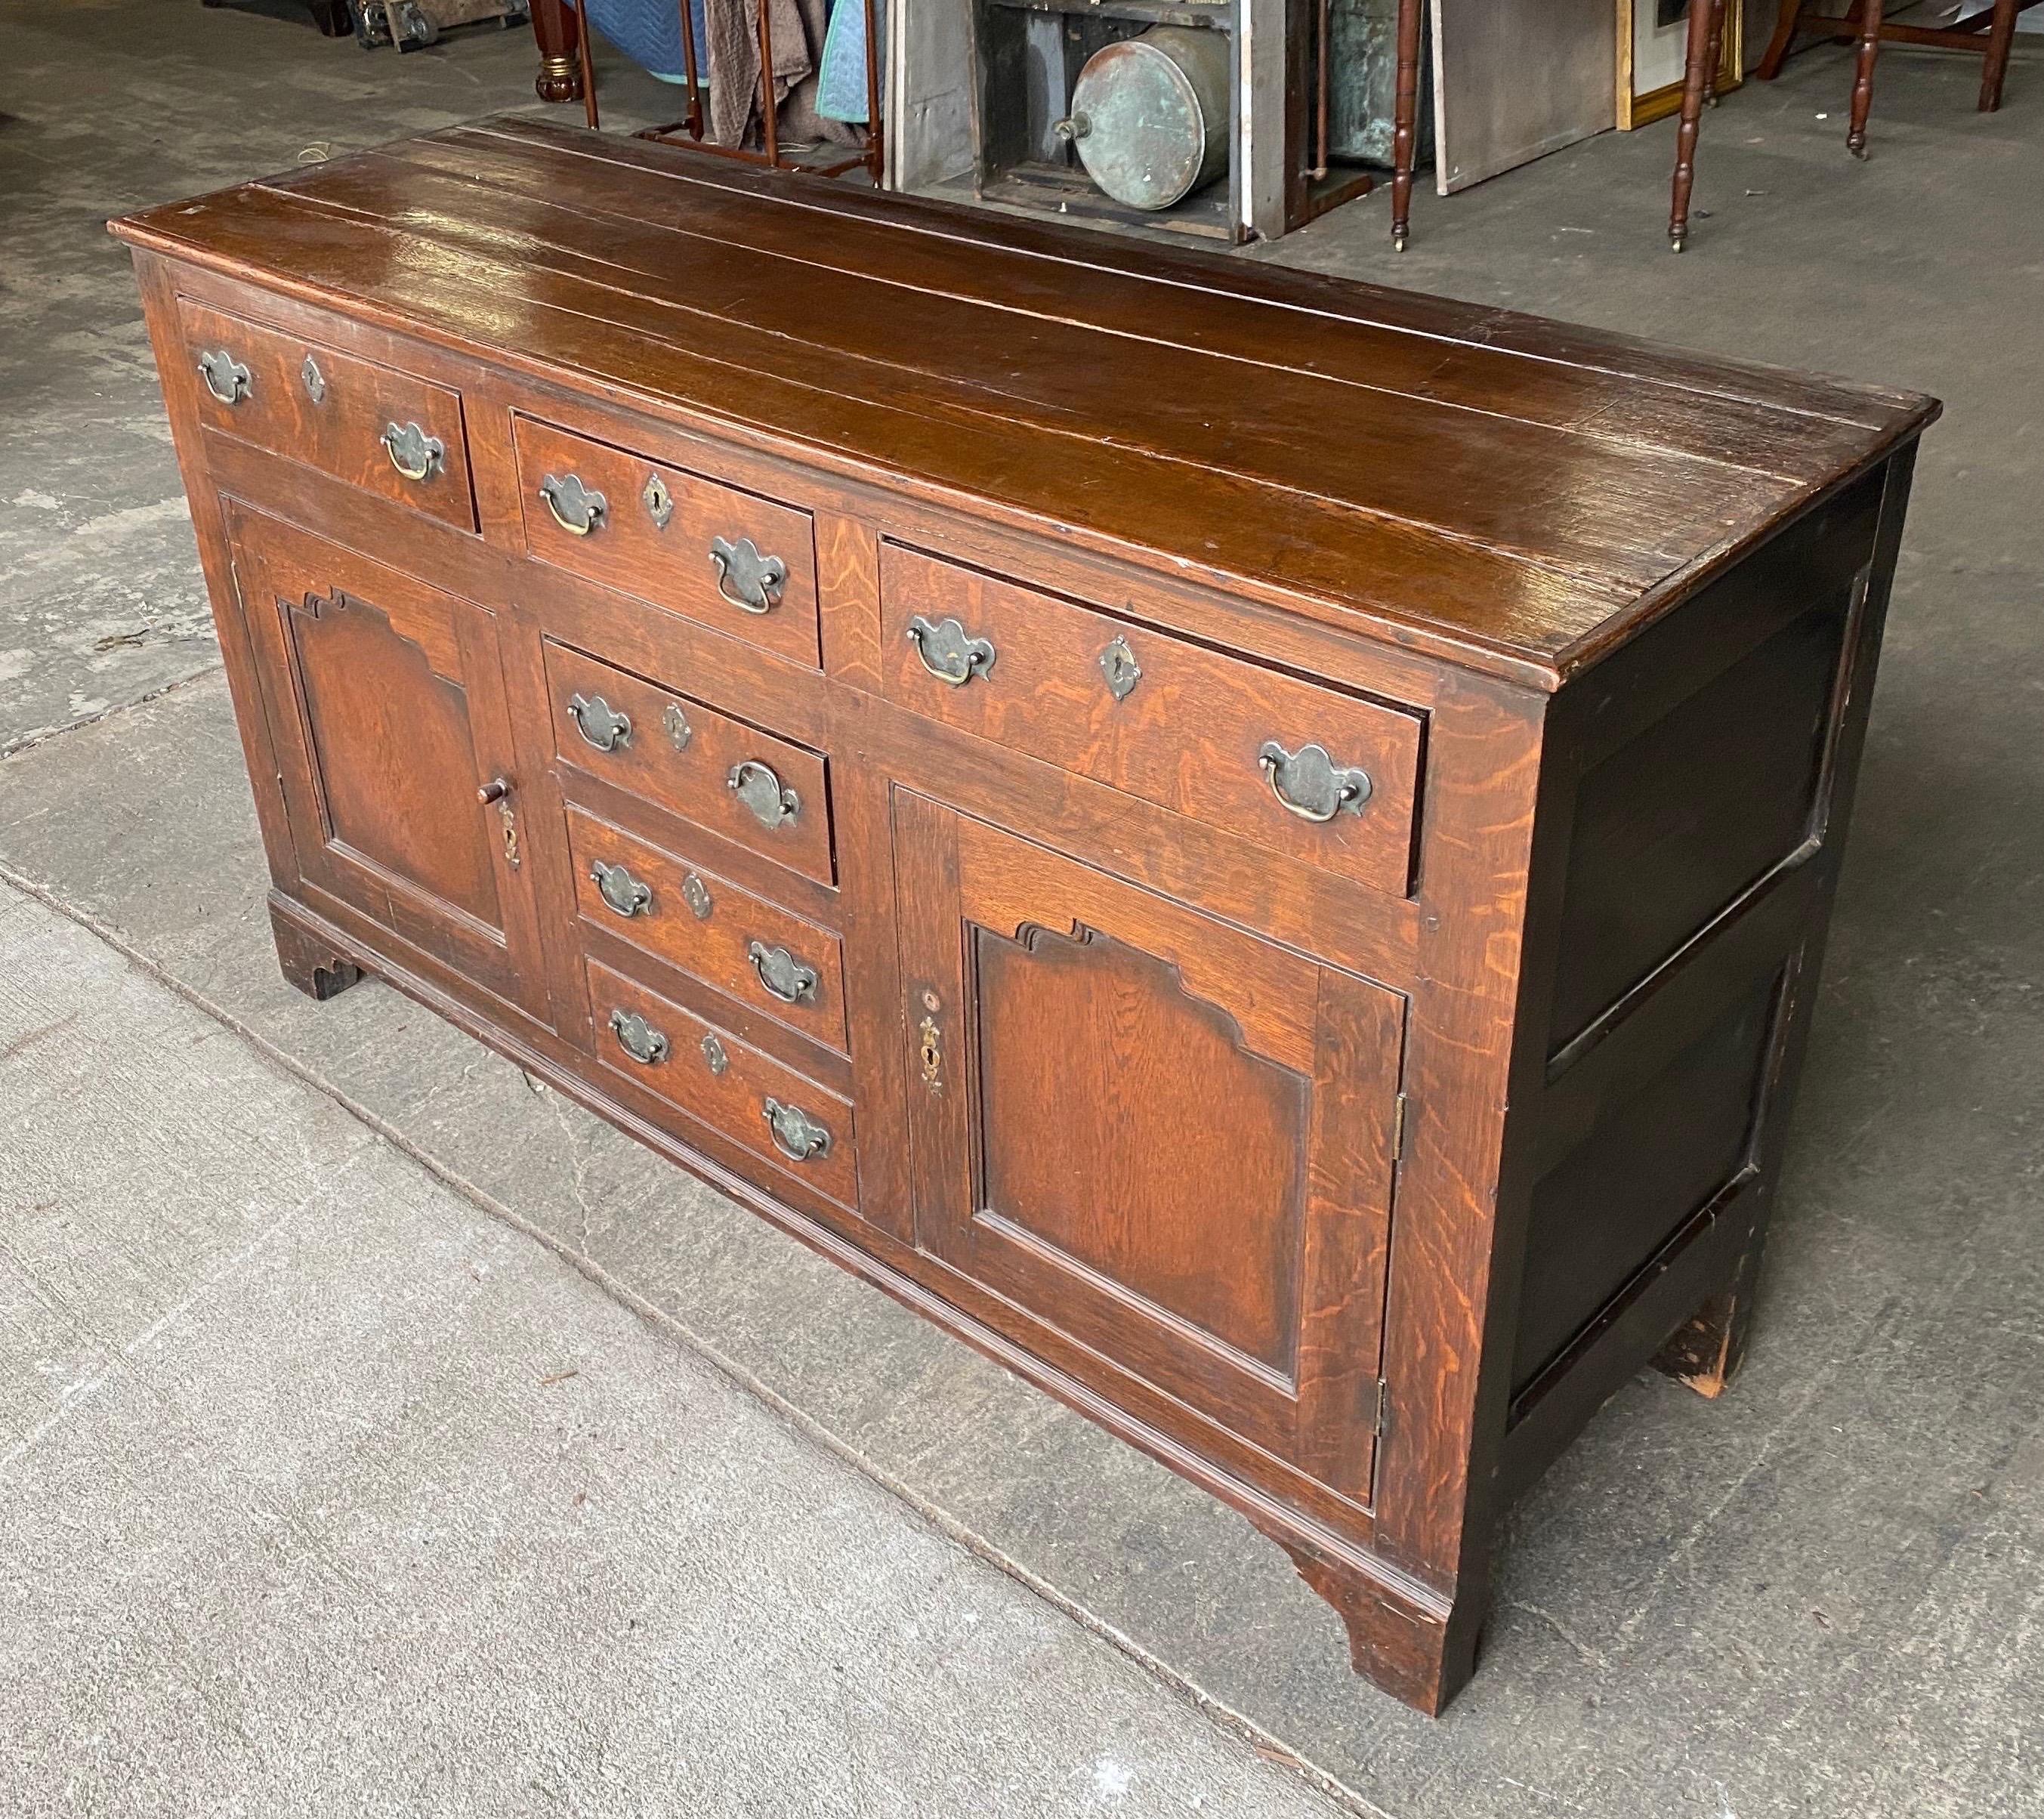 19th century Welsh oak dresser base. 3 drawers over 2 doors and 2 faux bottom drawers, paneled doors and bracket feet.